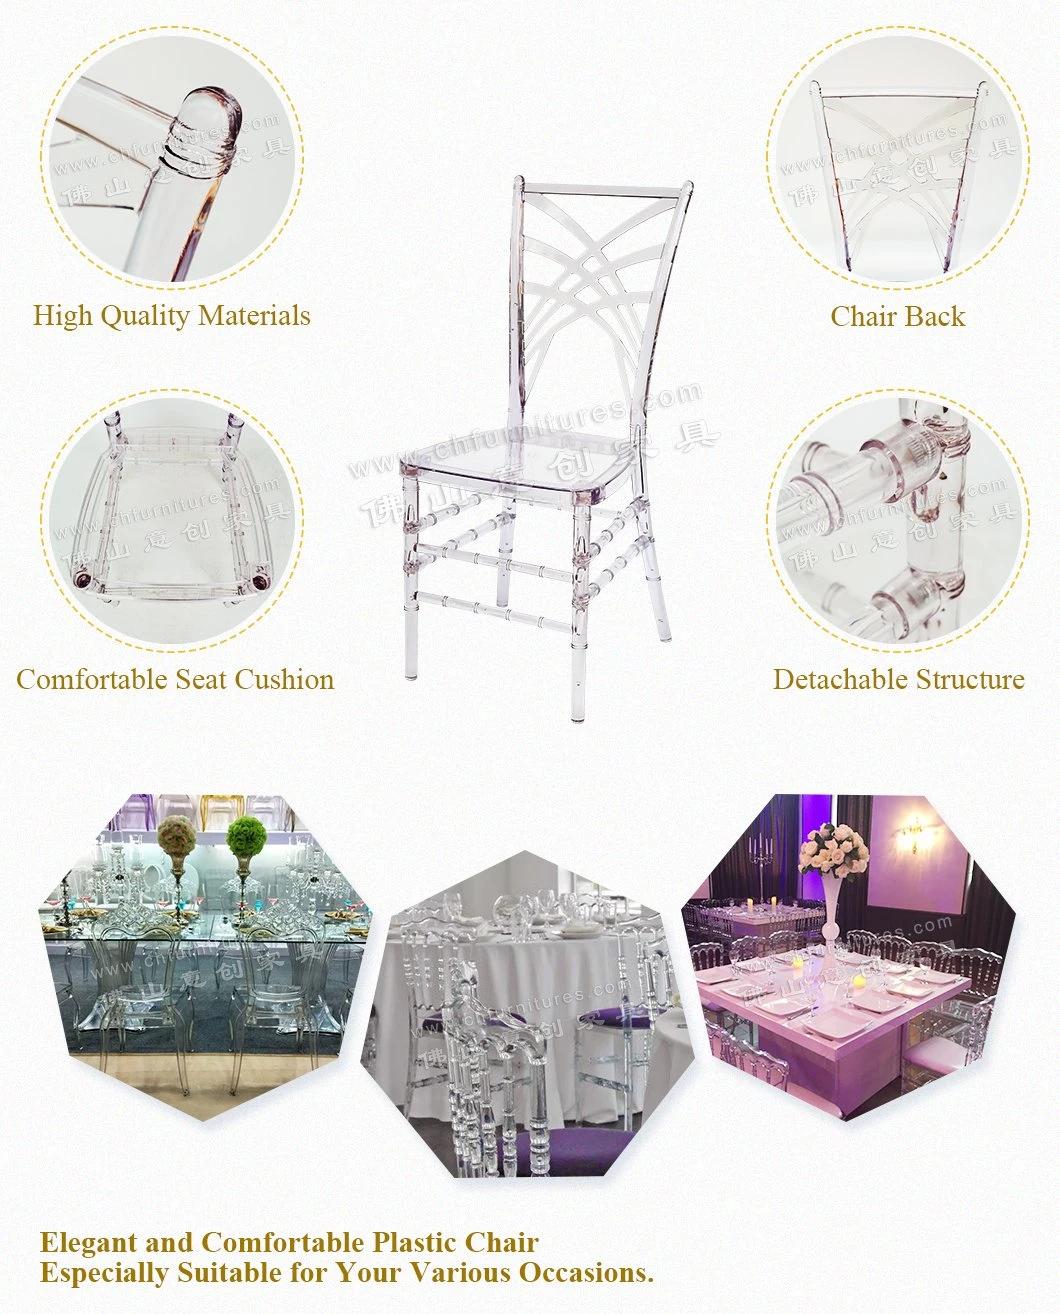 Hyc-P22 Hot Sale Crystal Garden Plastic Chair Outdoor